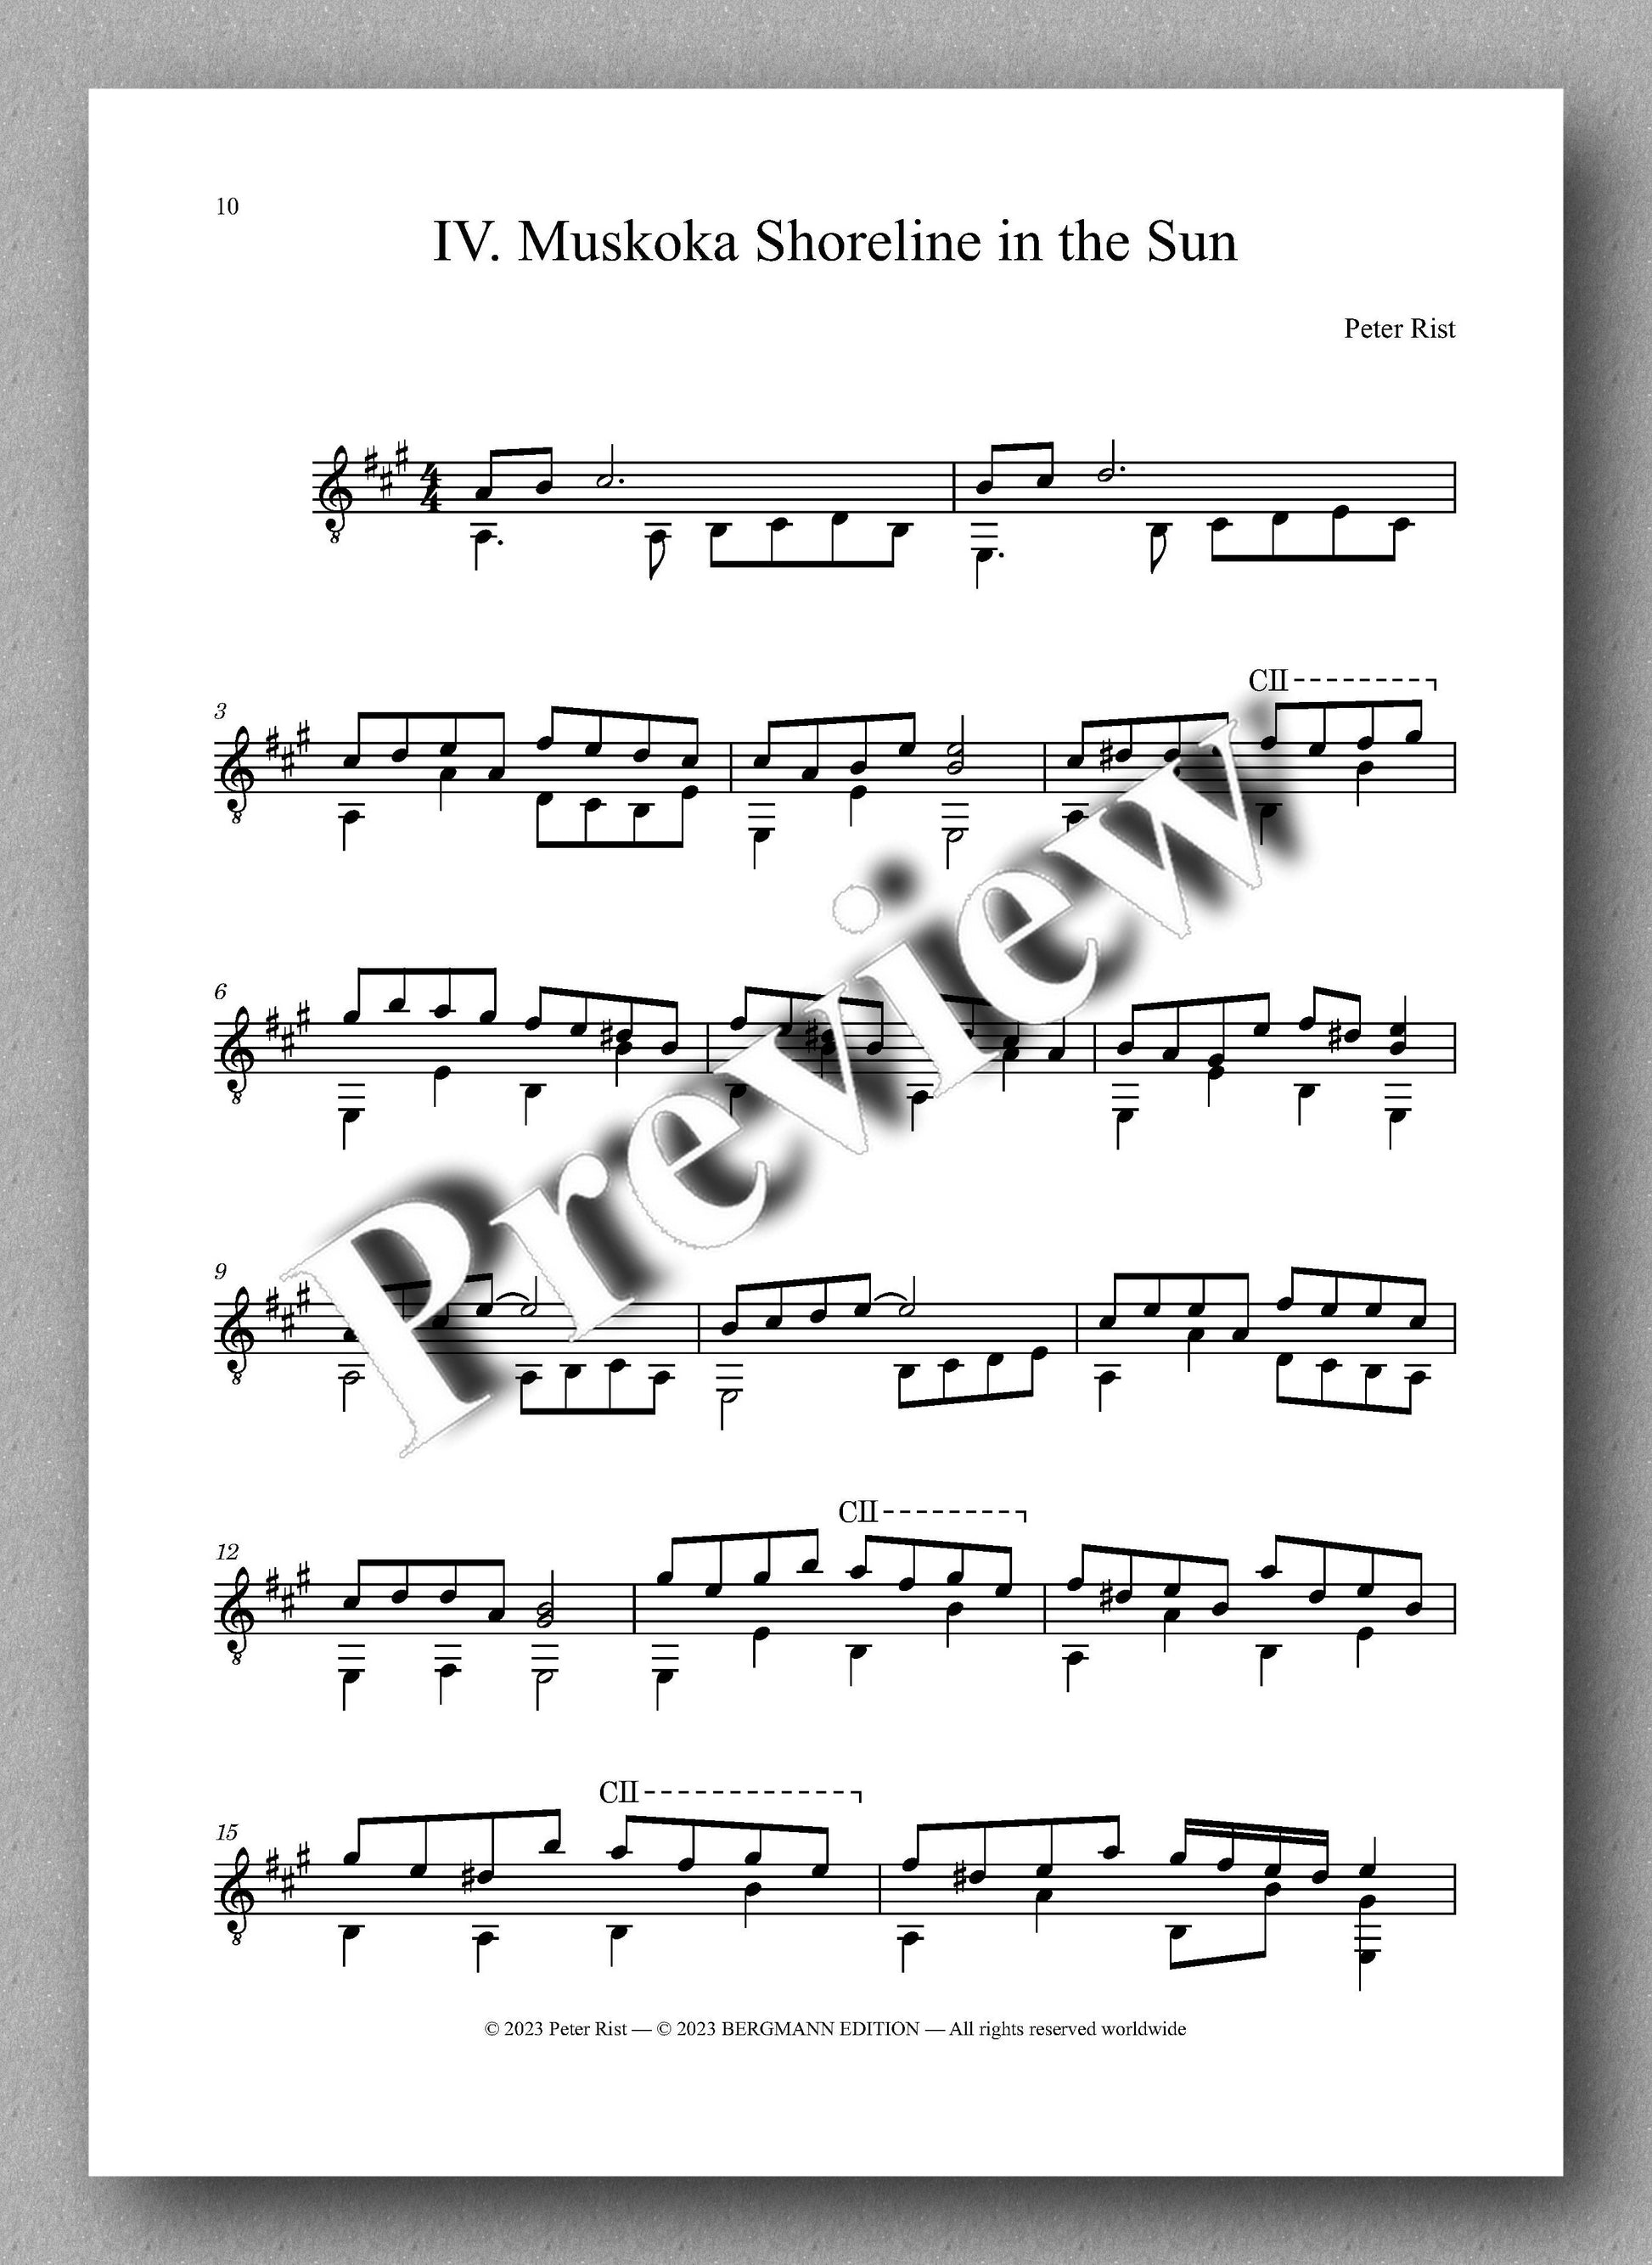 Five Canadian Pieces by Peter Rist - preview of the music score 4